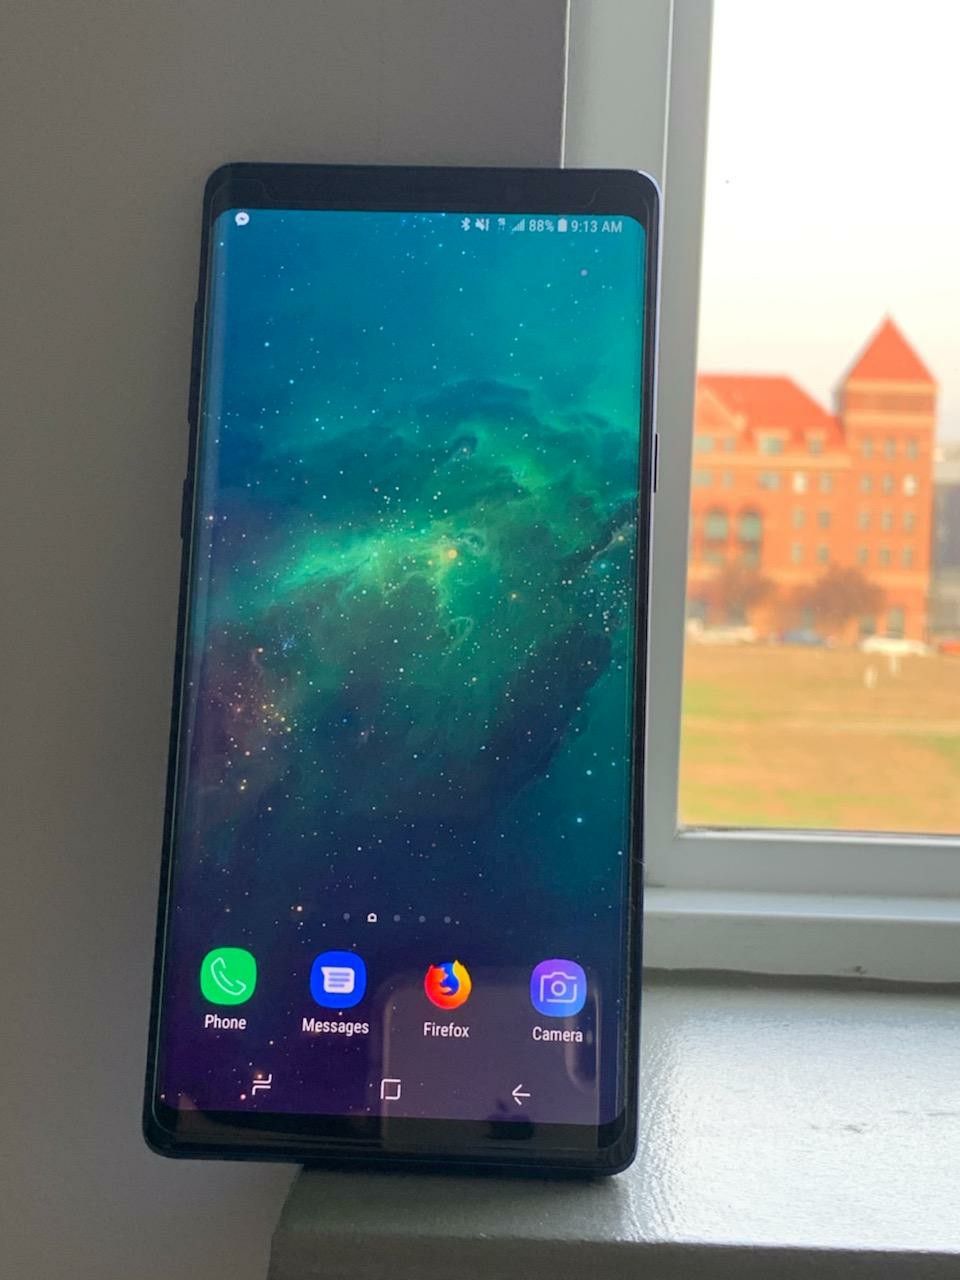 Samsung Note 9 for sale or trade